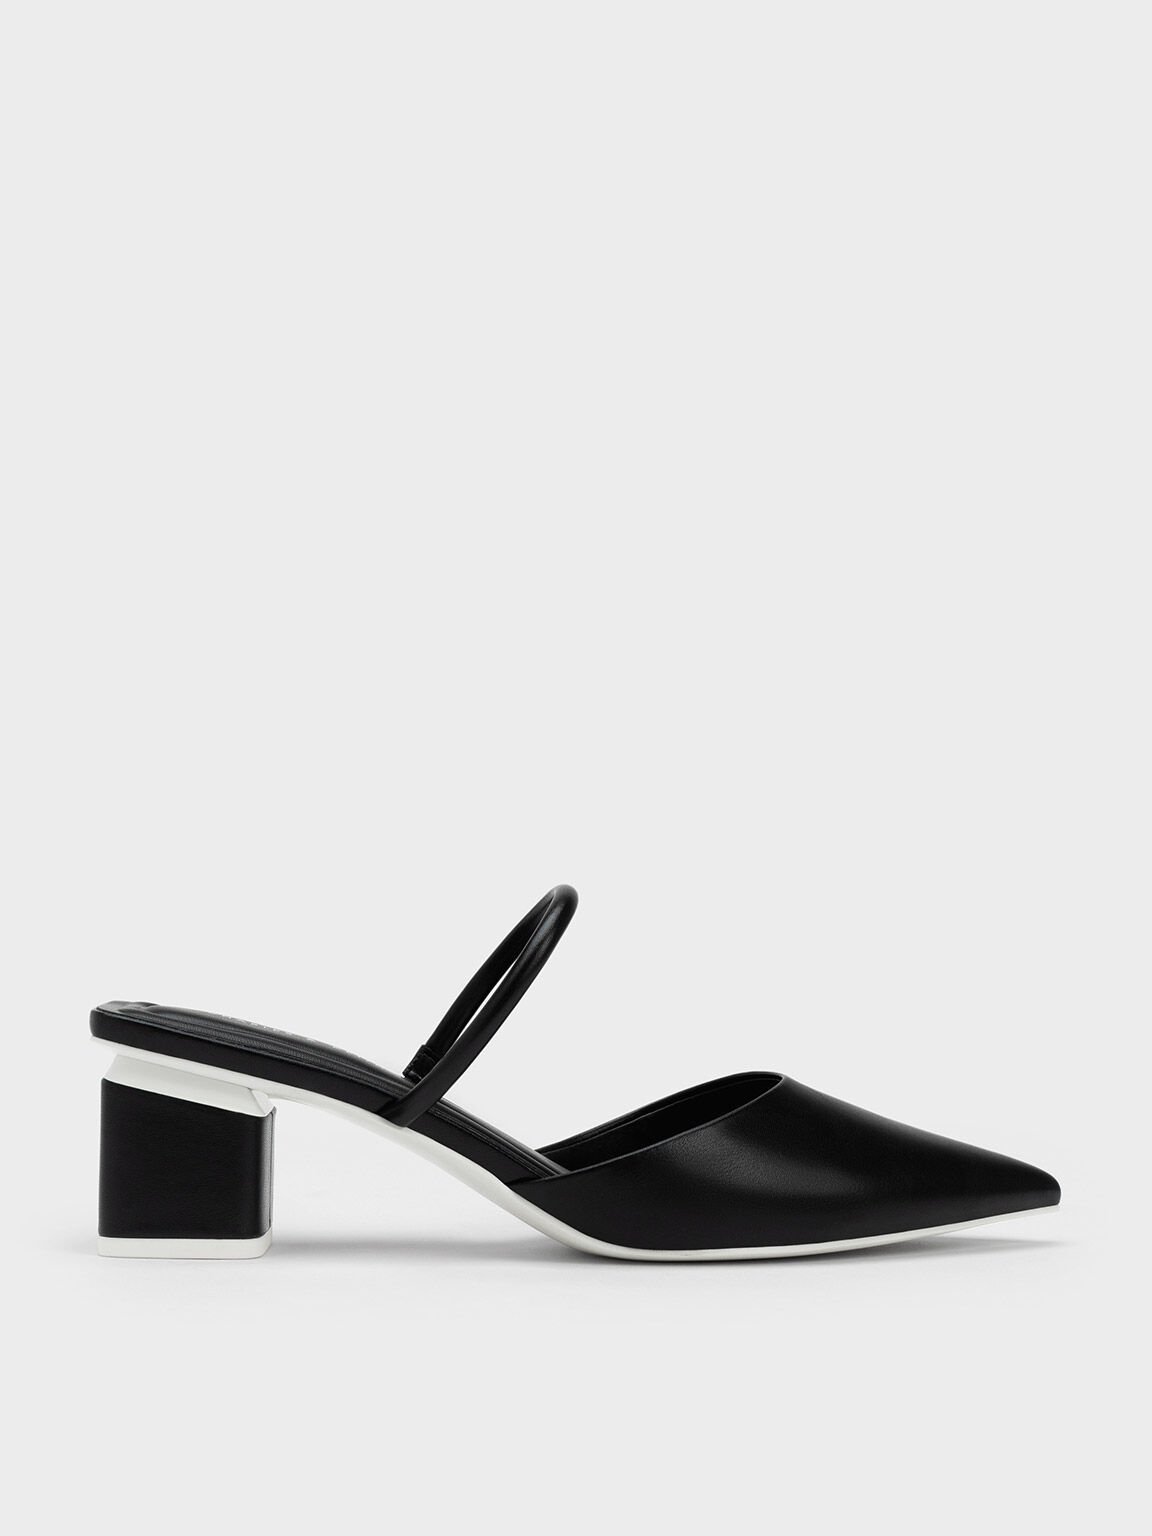 LV Runner Tatic Mules - Luxury Sandals - Shoes